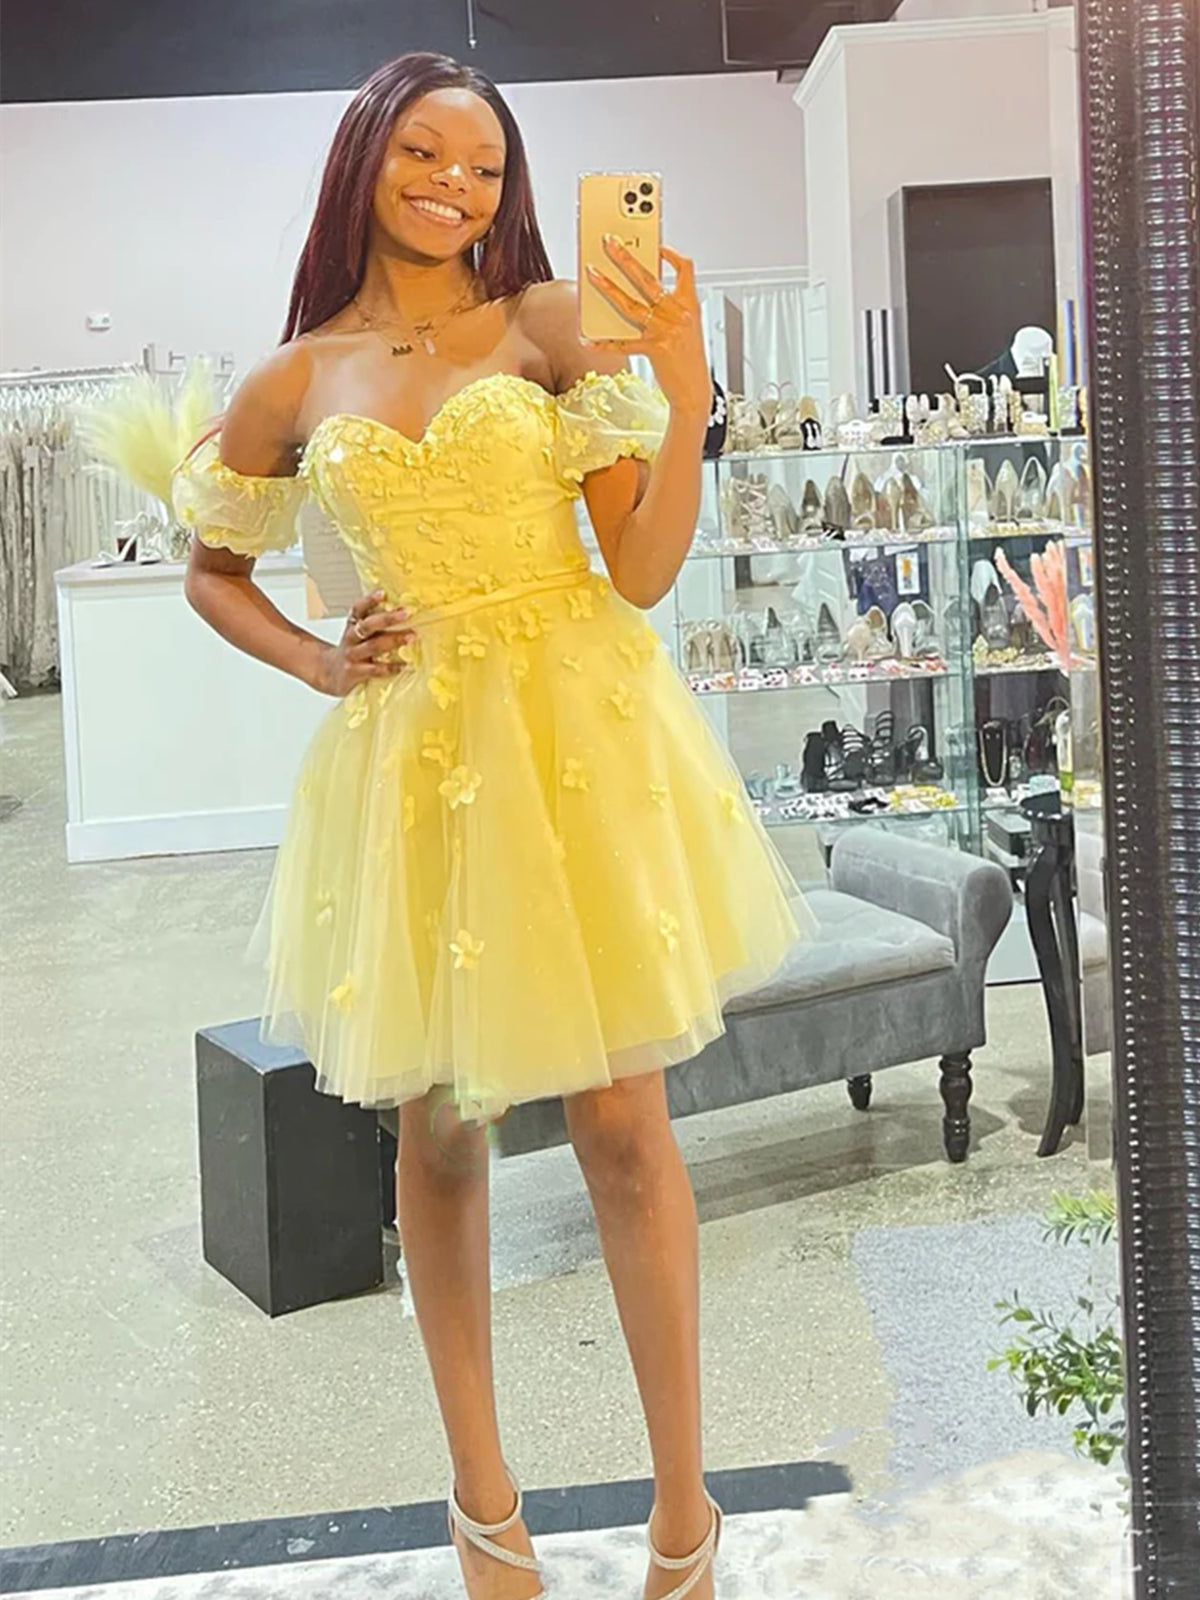 Off Shoulder Yellow Lace Floral Prom Dresses, Yellow Lace Homecoming Dresses, Short Yellow Formal Evening Dresses 